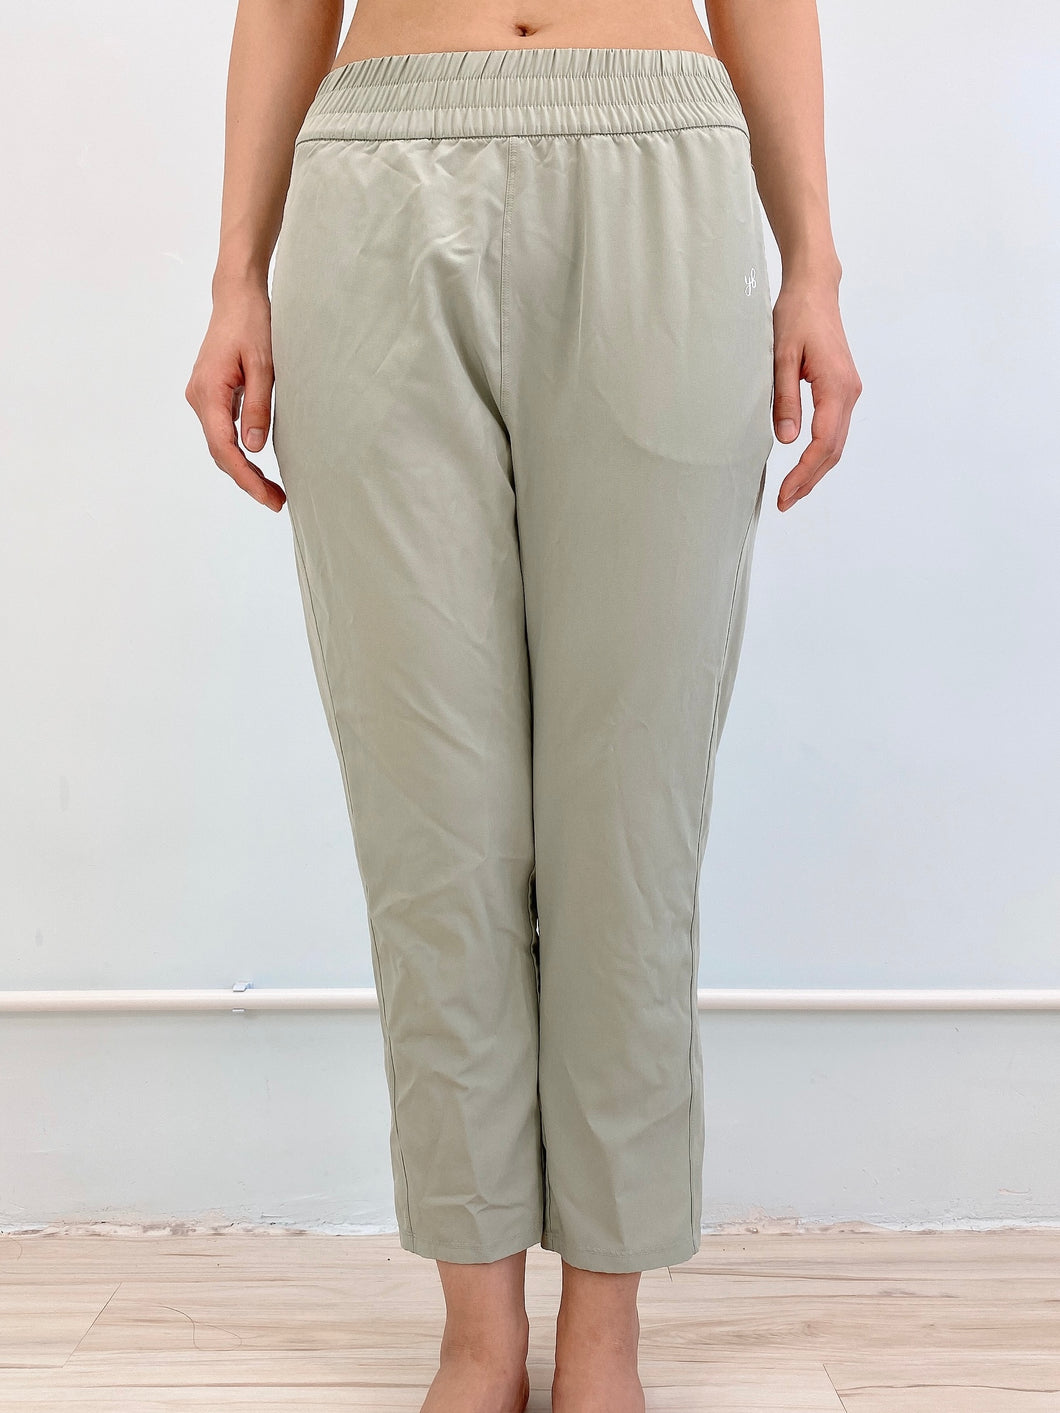 Relaxed Ankle Length Joggers (Petite) - Matcha